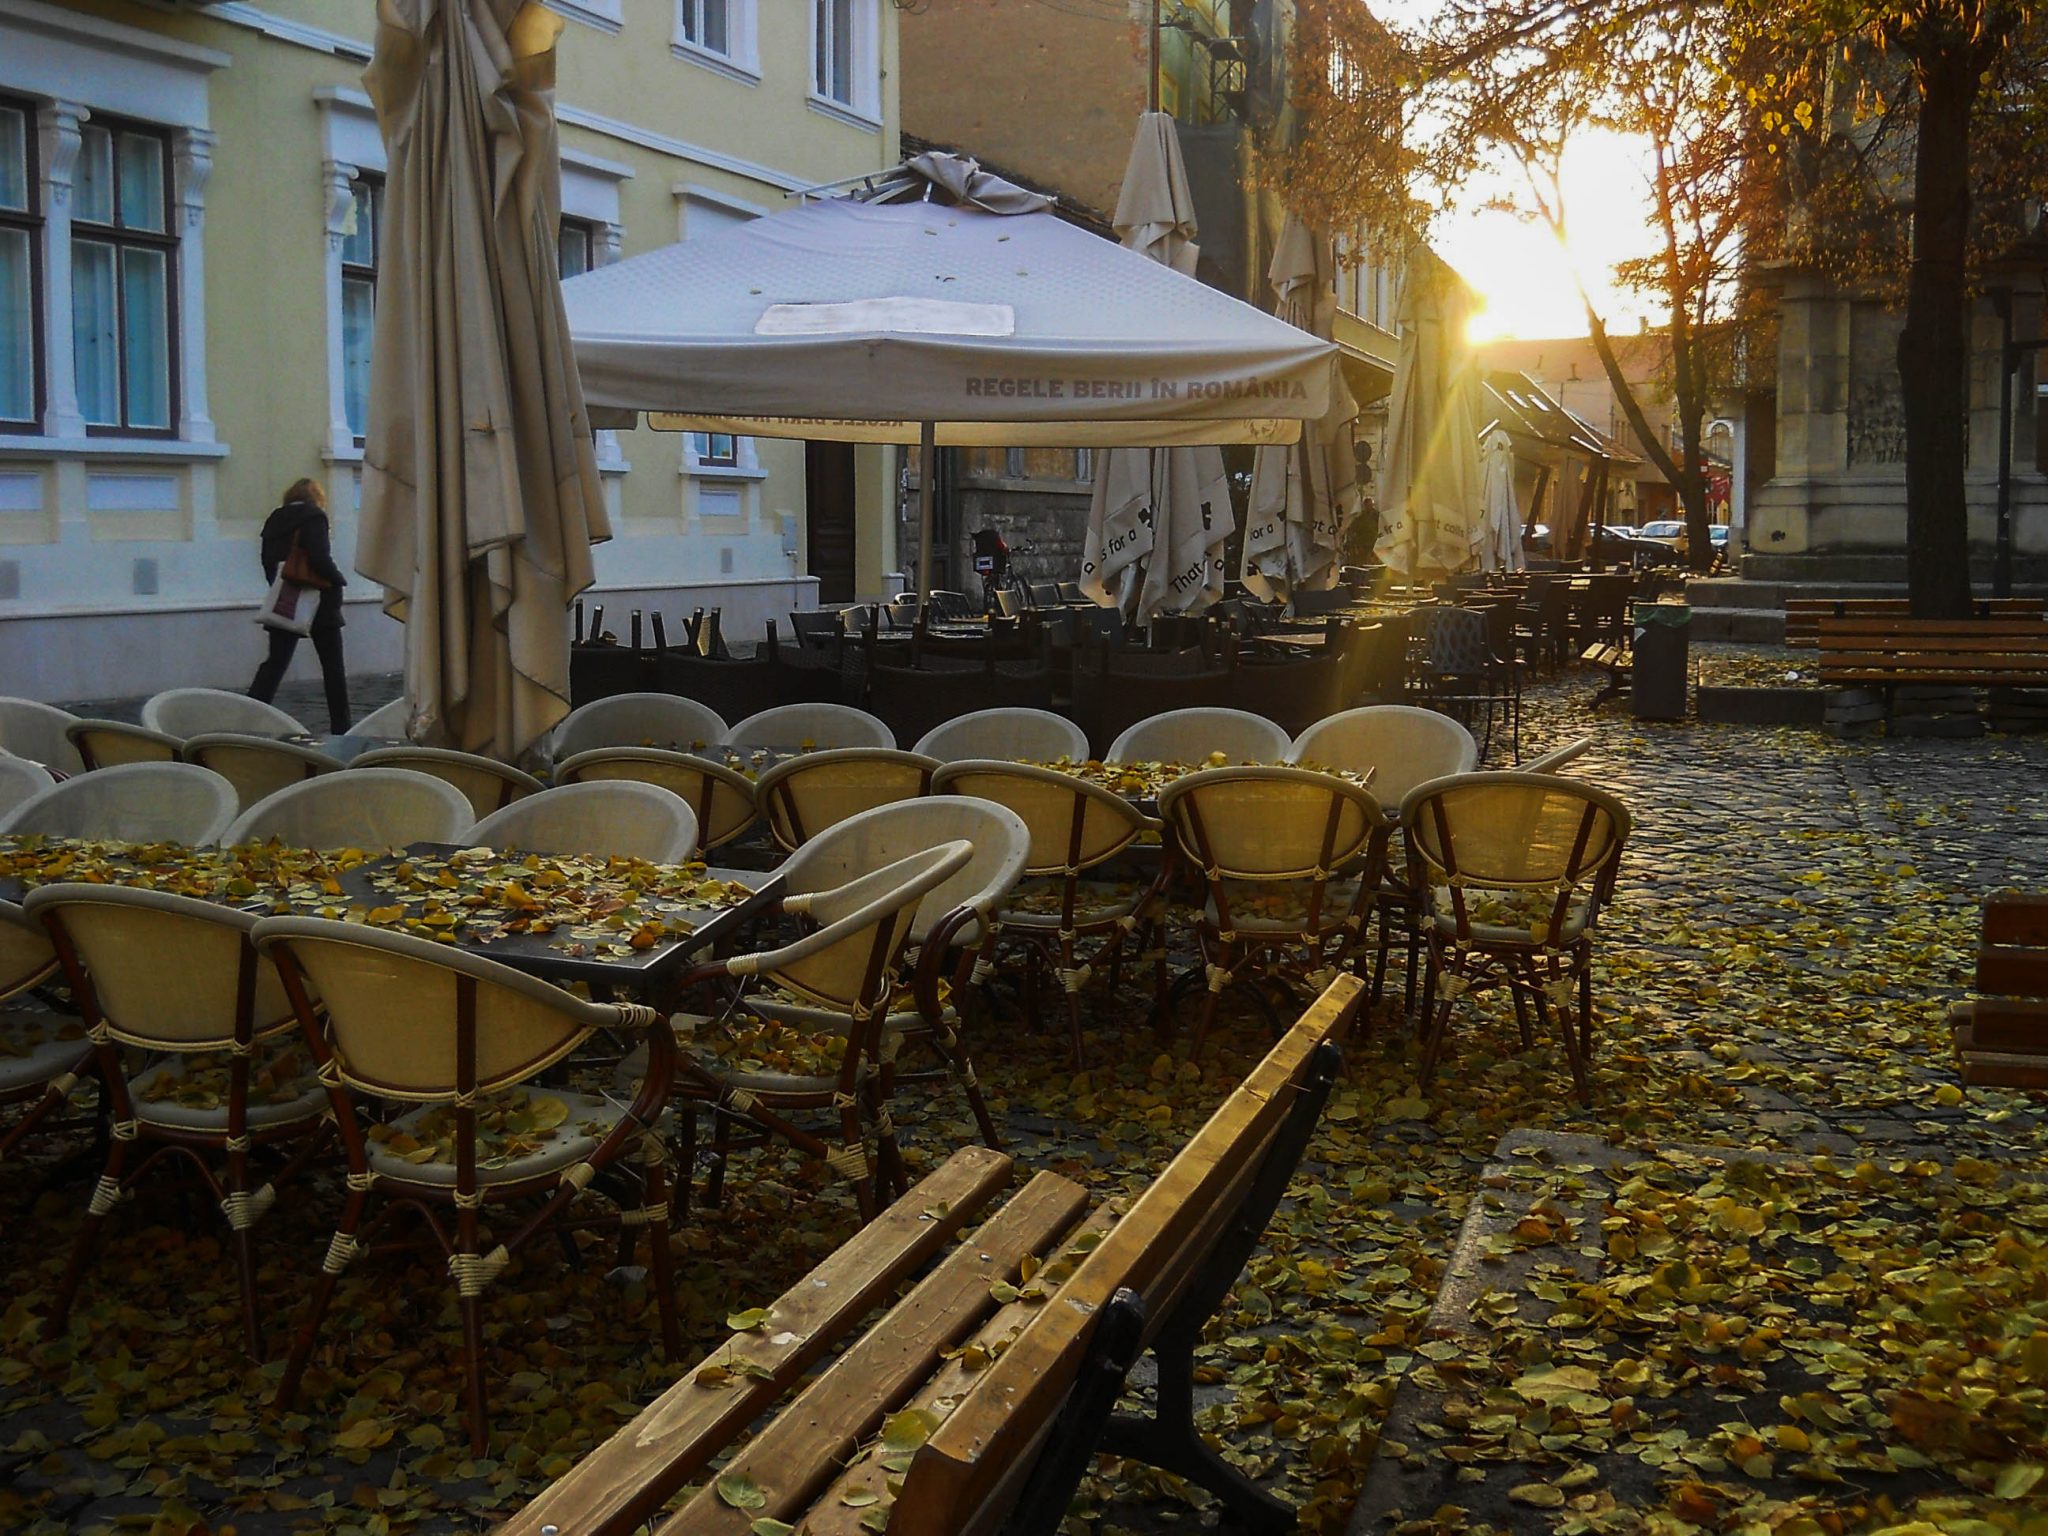 Cafe waiting to be opened during an autumn day - A complete travel guide to Cluj-Napoca